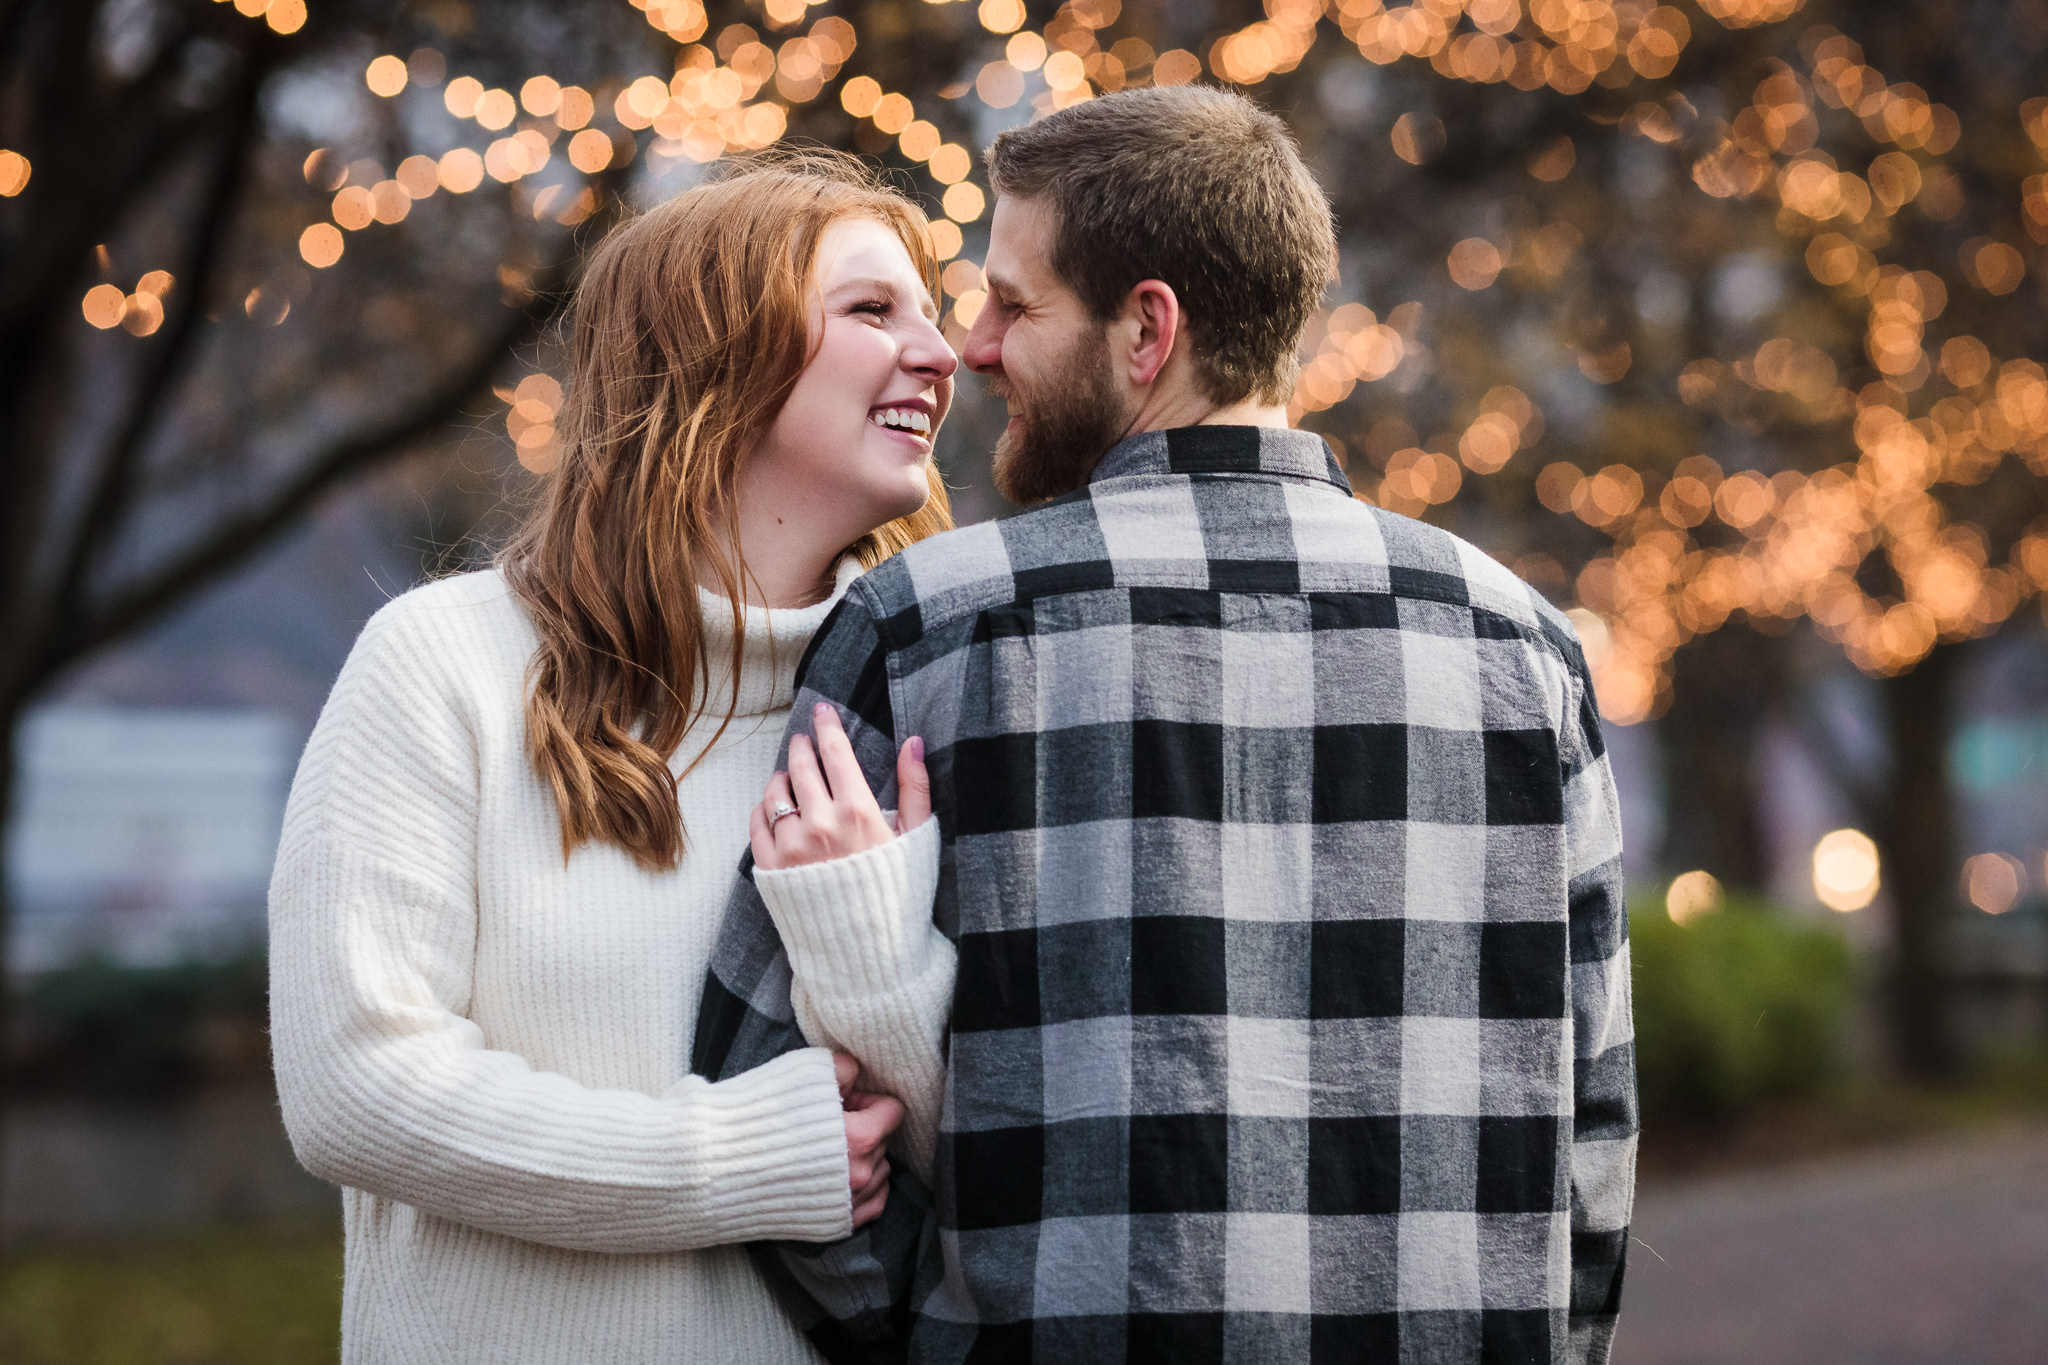 North Shore engagement session with Christmas lights